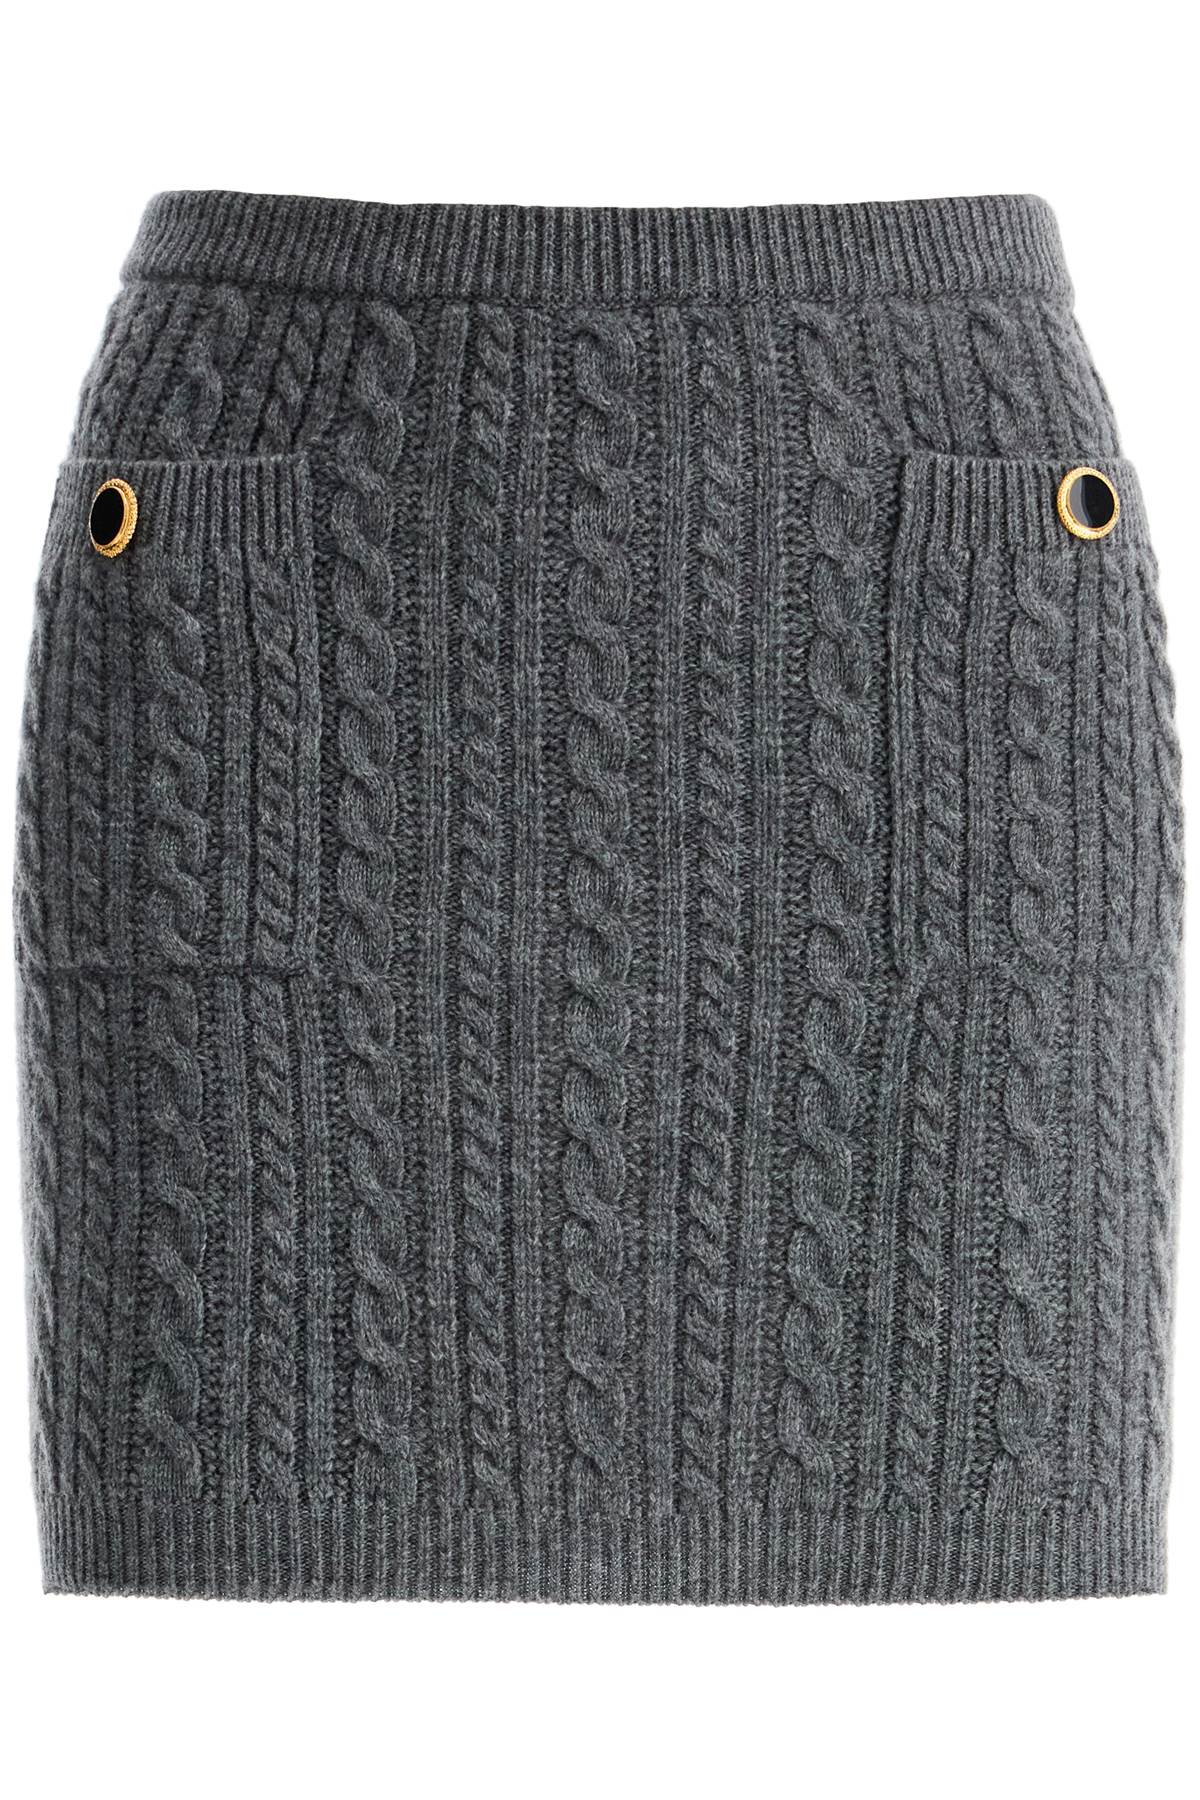 Alessandra Rich Knitted Mini Skirt With Braided   Grey